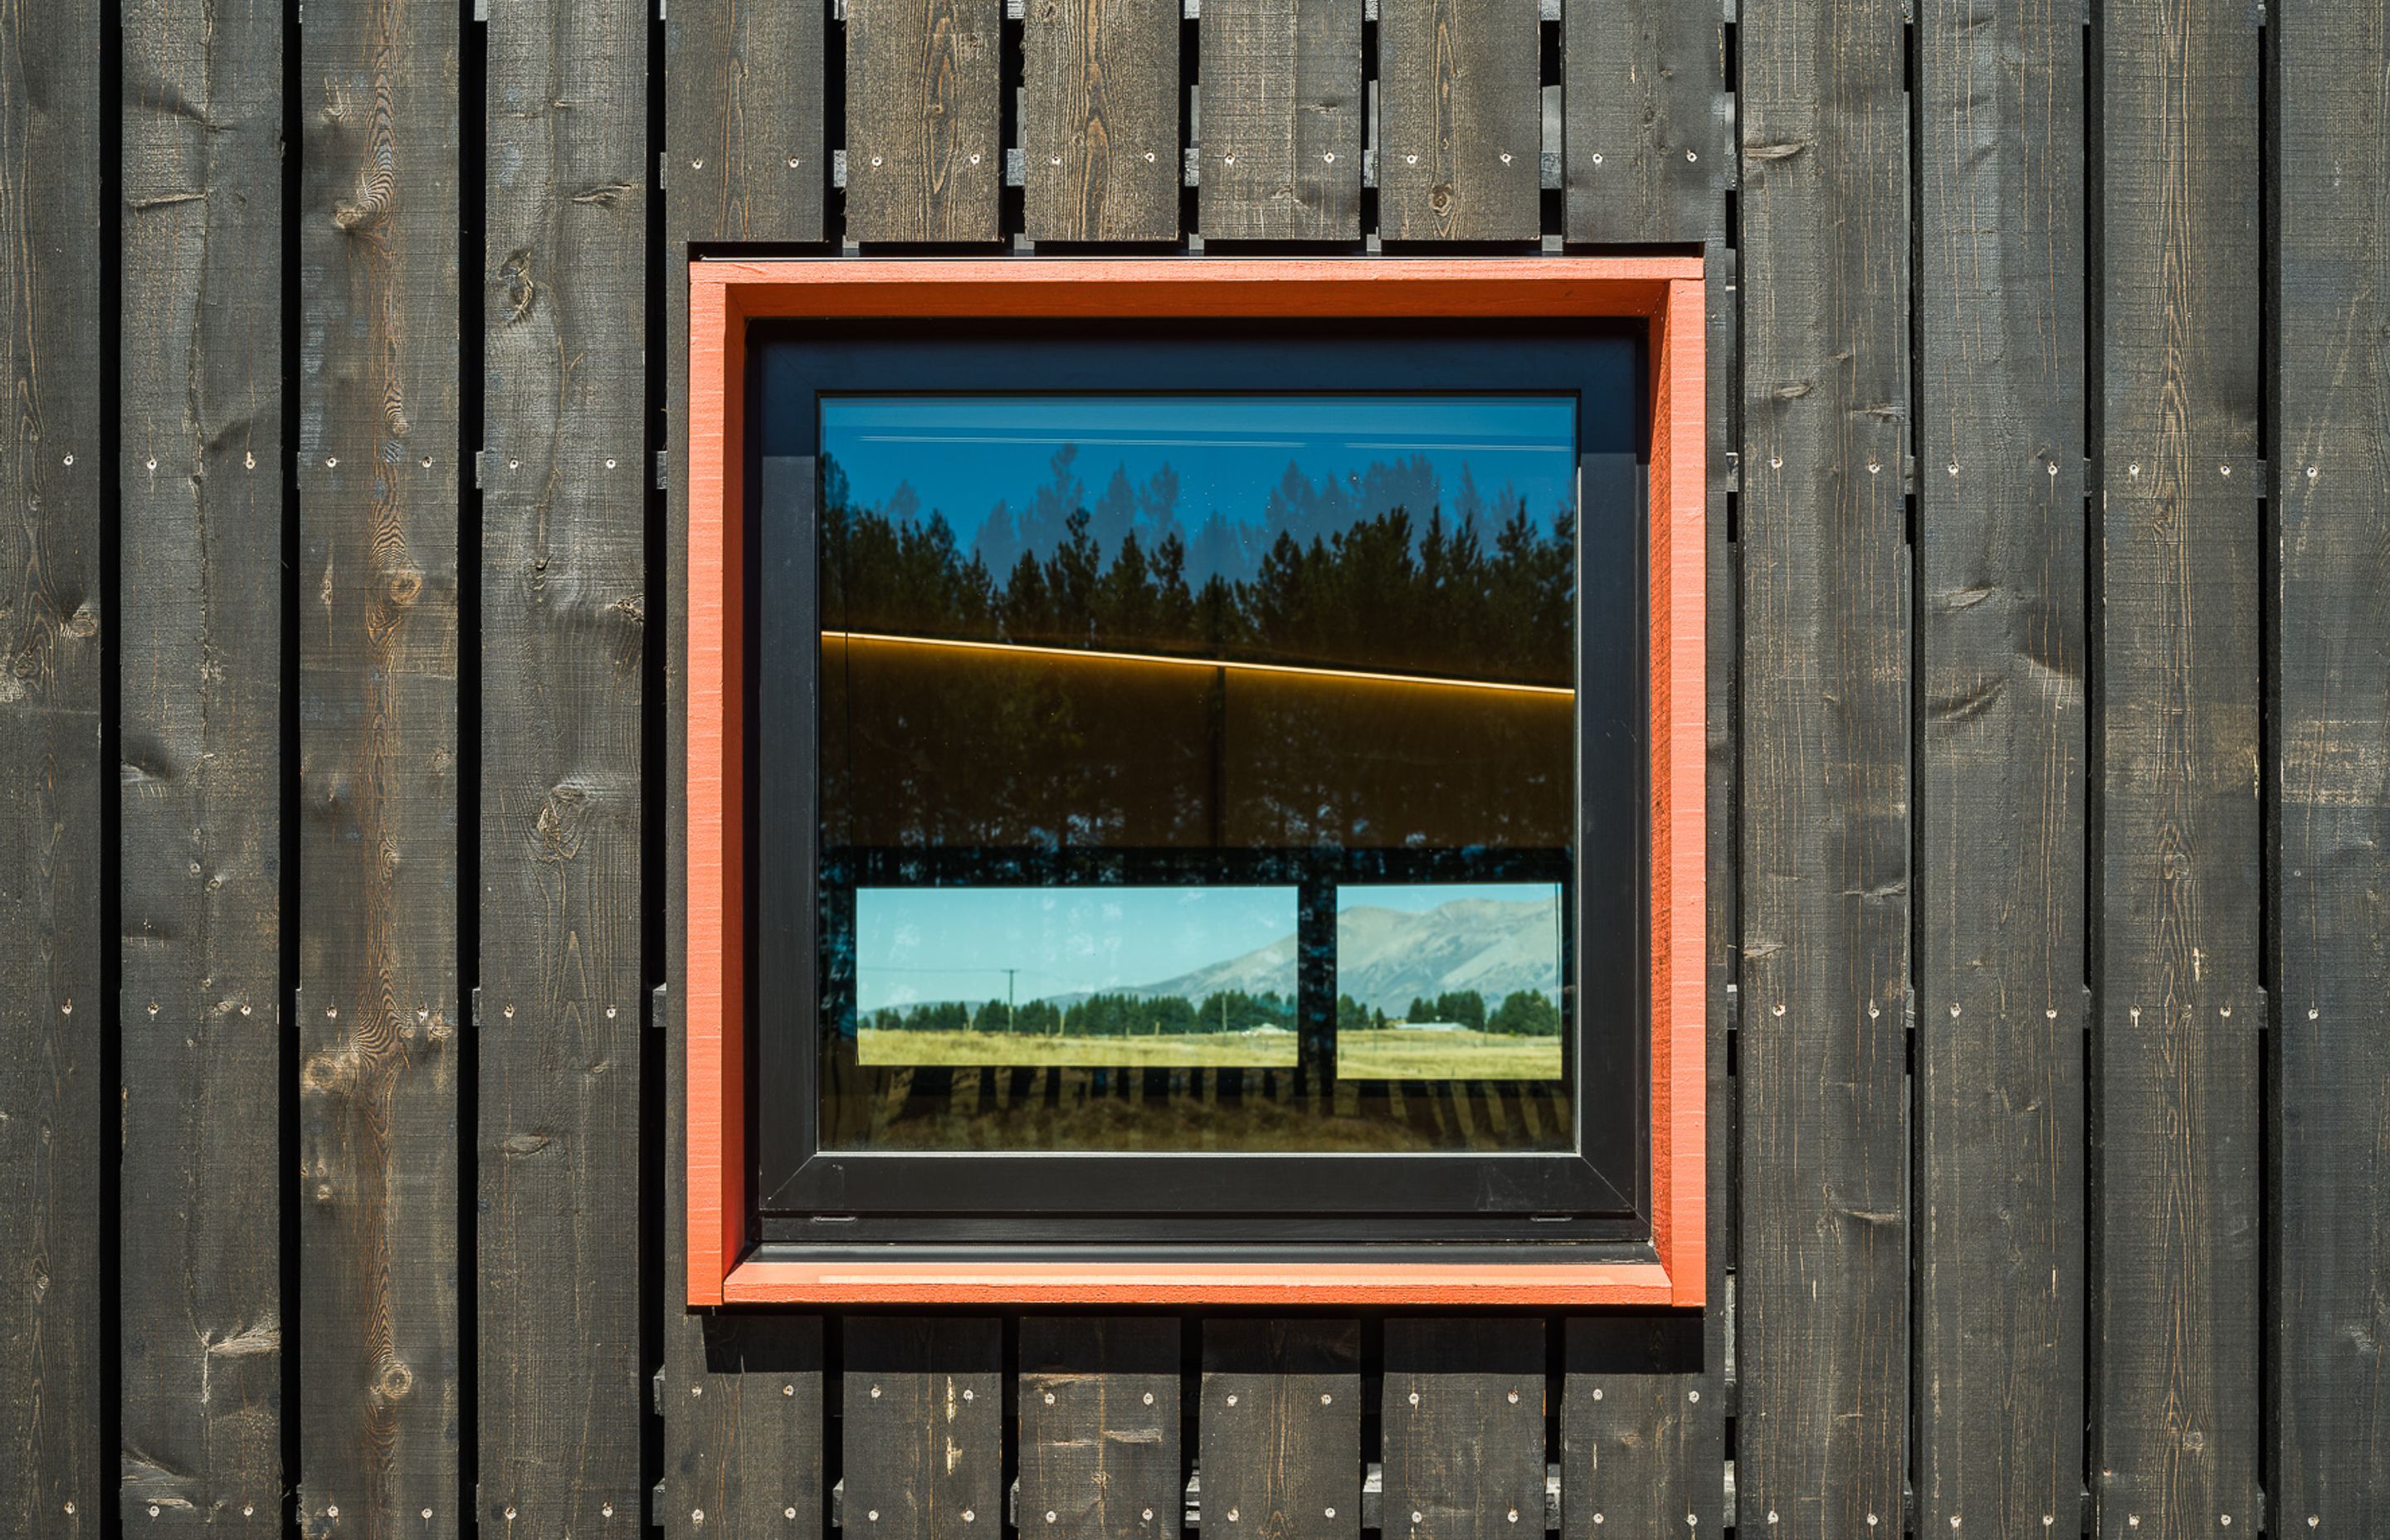 Burnt orange window frames punctuate the larch shell. The colour was a specific client request and has been used to emphasise the main structural elements.